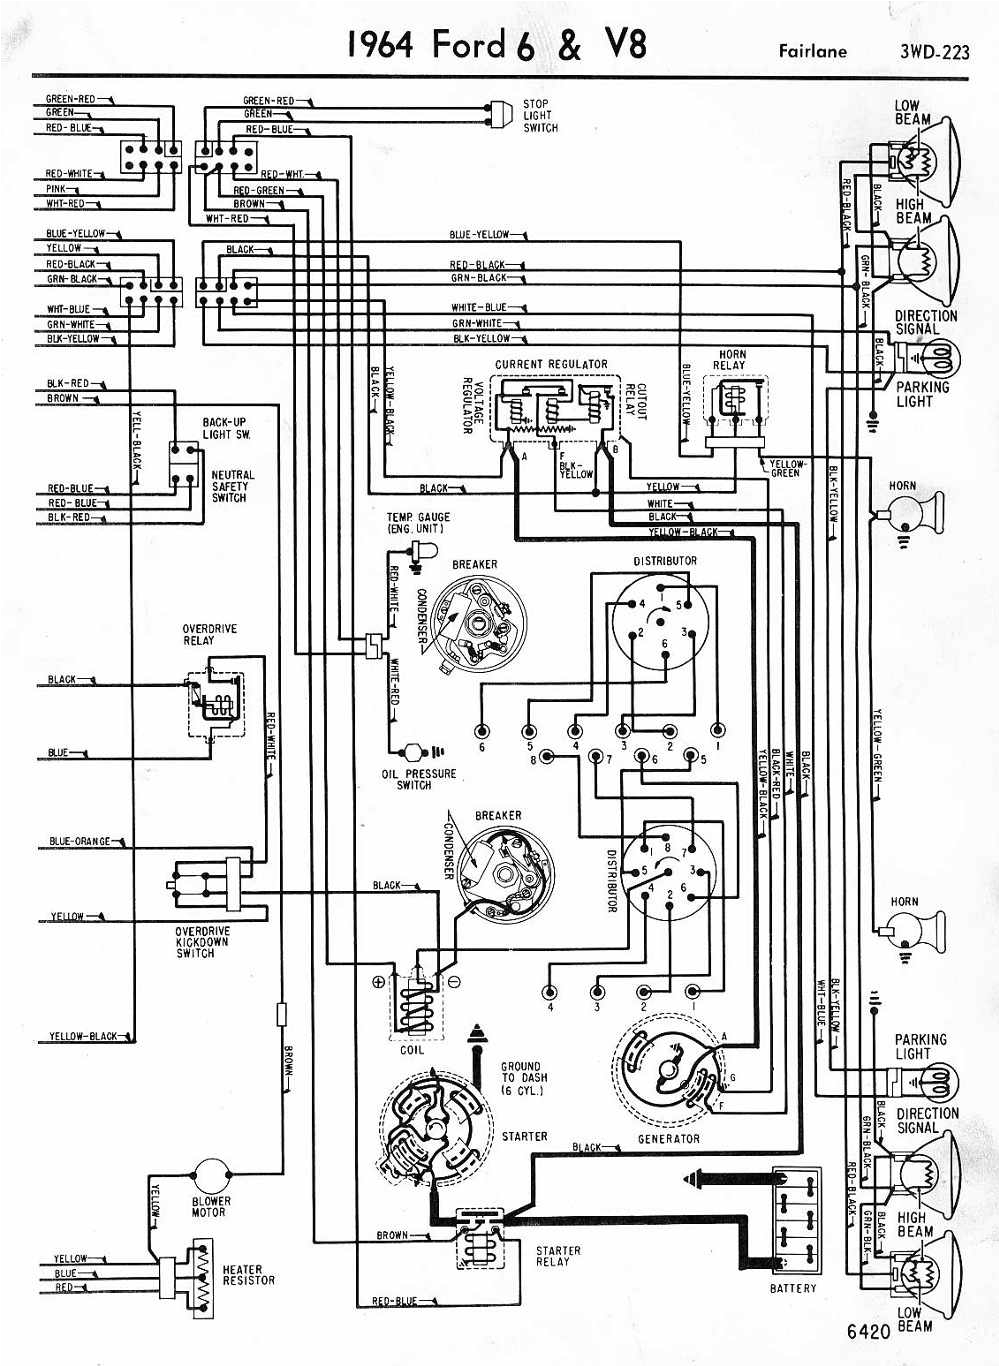 photo ford wiring diagram 1967 ford f250 wiring diagram wiring diagram1967 ford f100 wiring schematic online wiring diagramf100 wiring diagram jpg